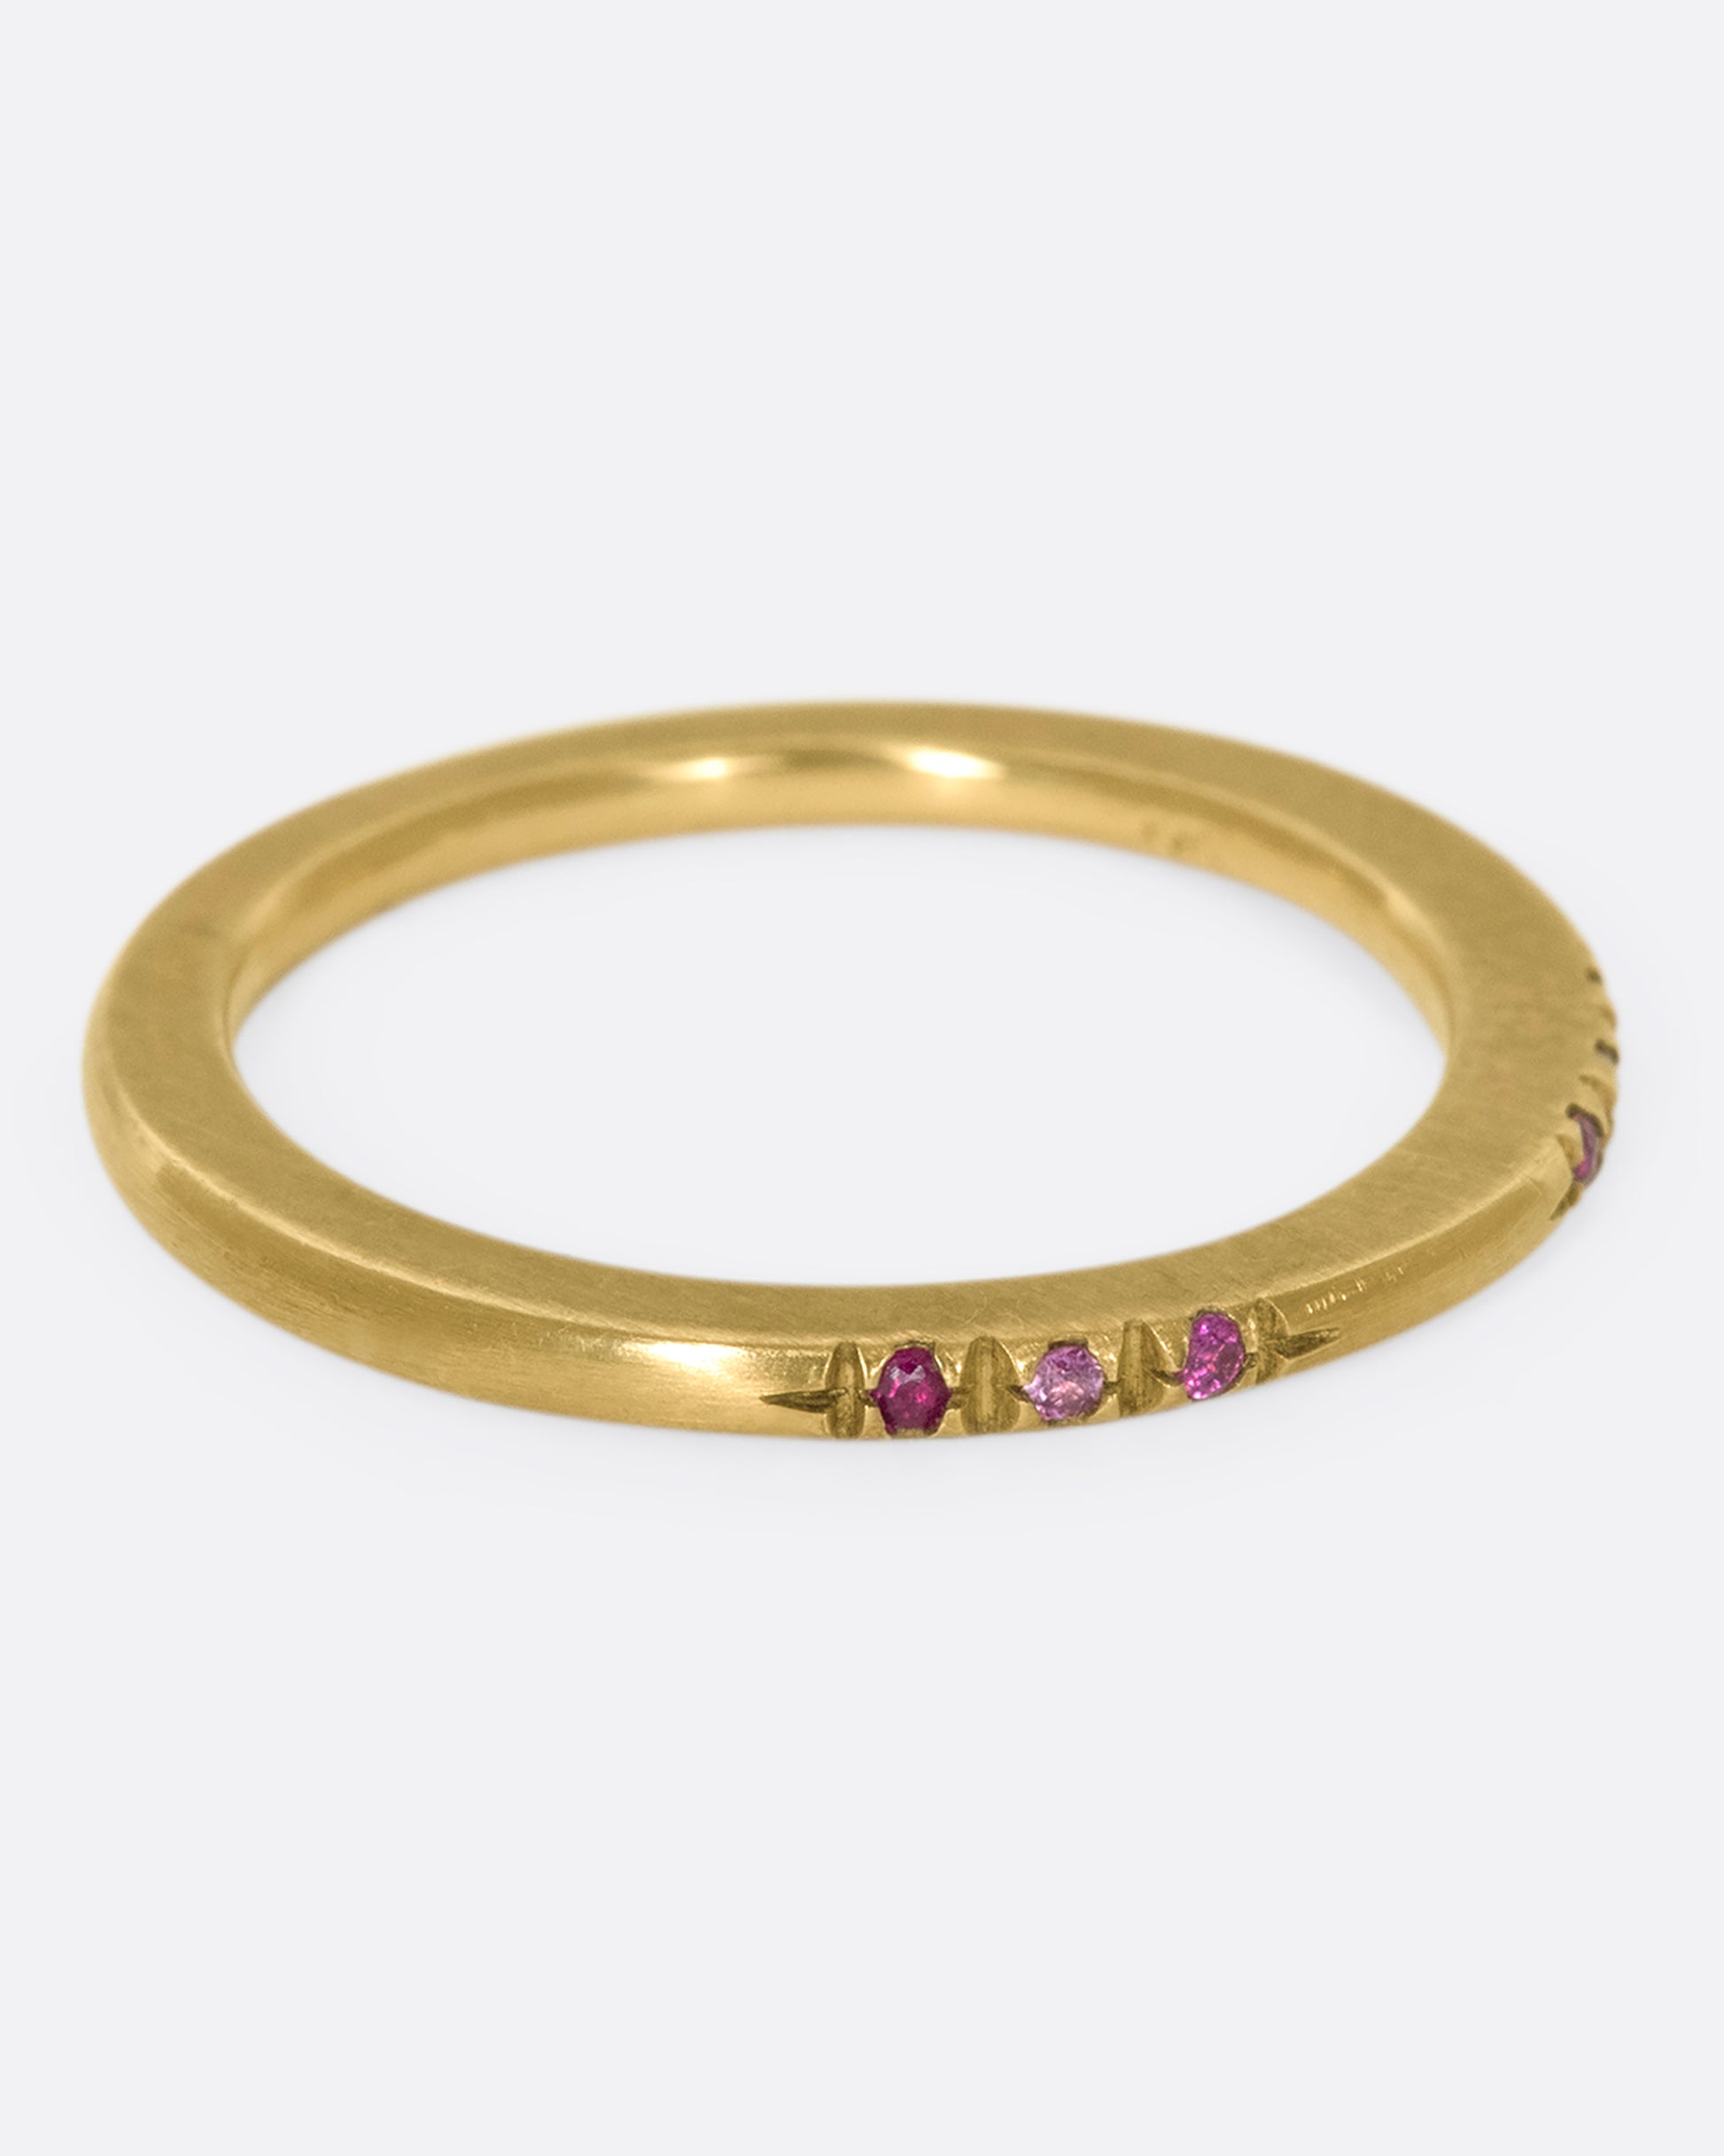 A 10k brushed gold band with rubies and pink sapphires